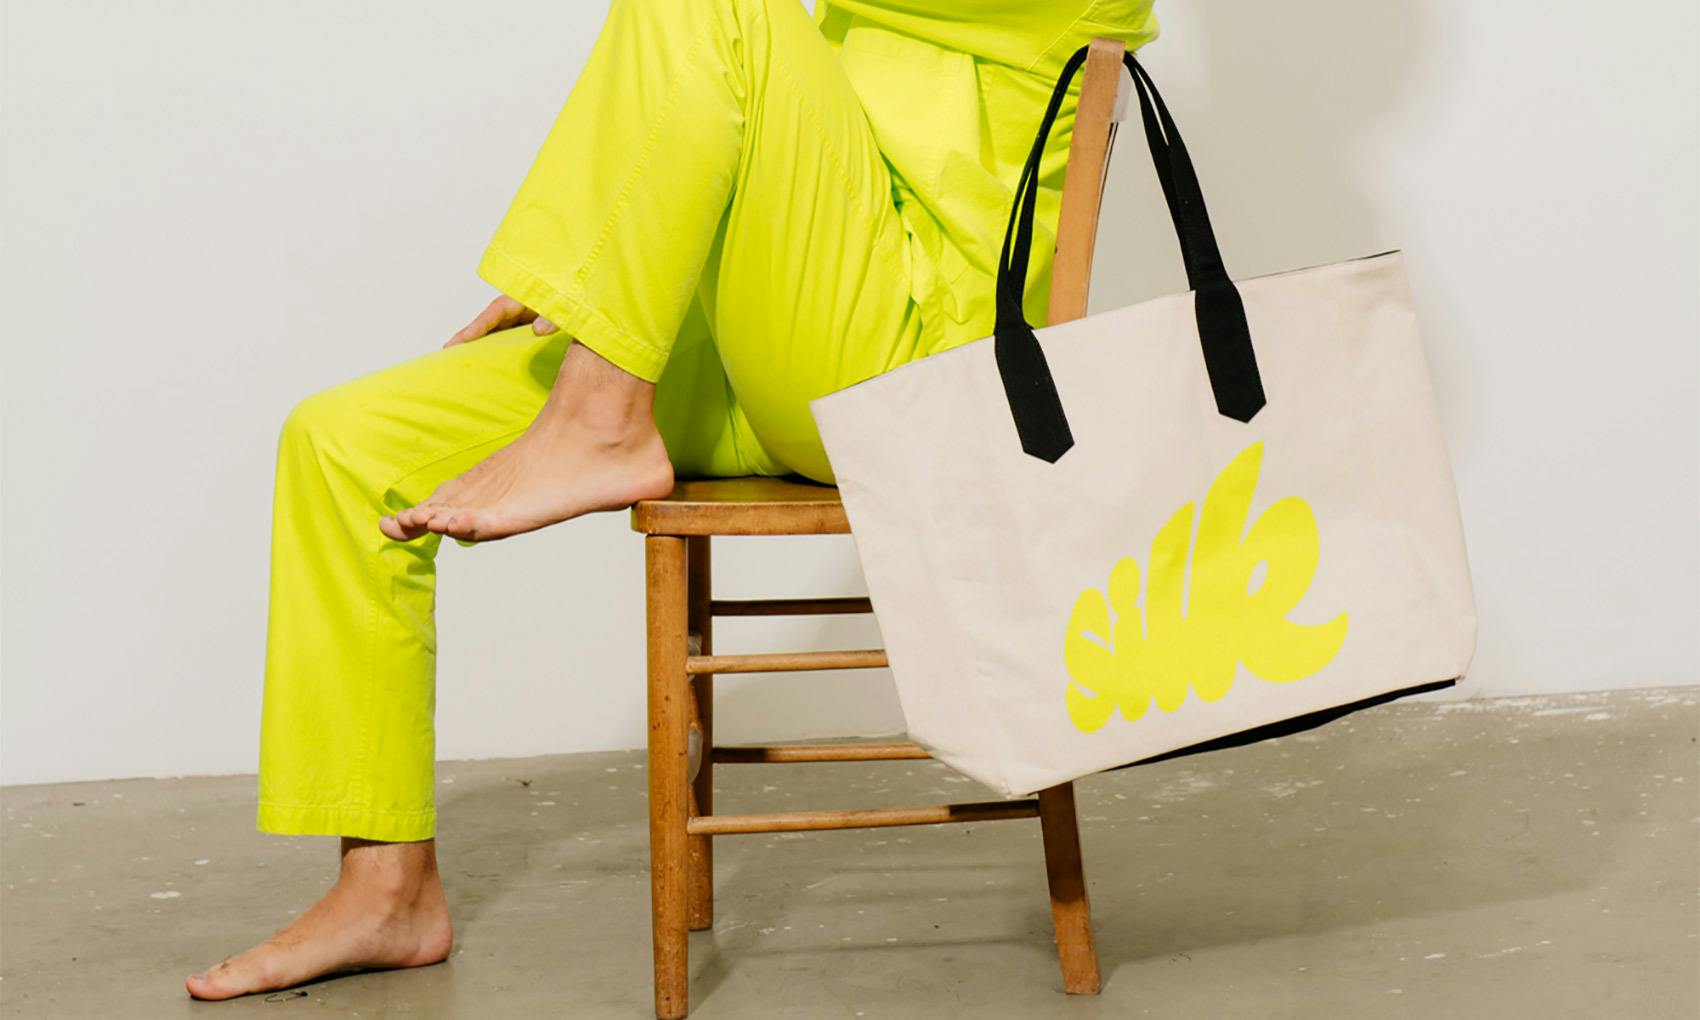 Model in yellow outfit, holding a bag that says silk